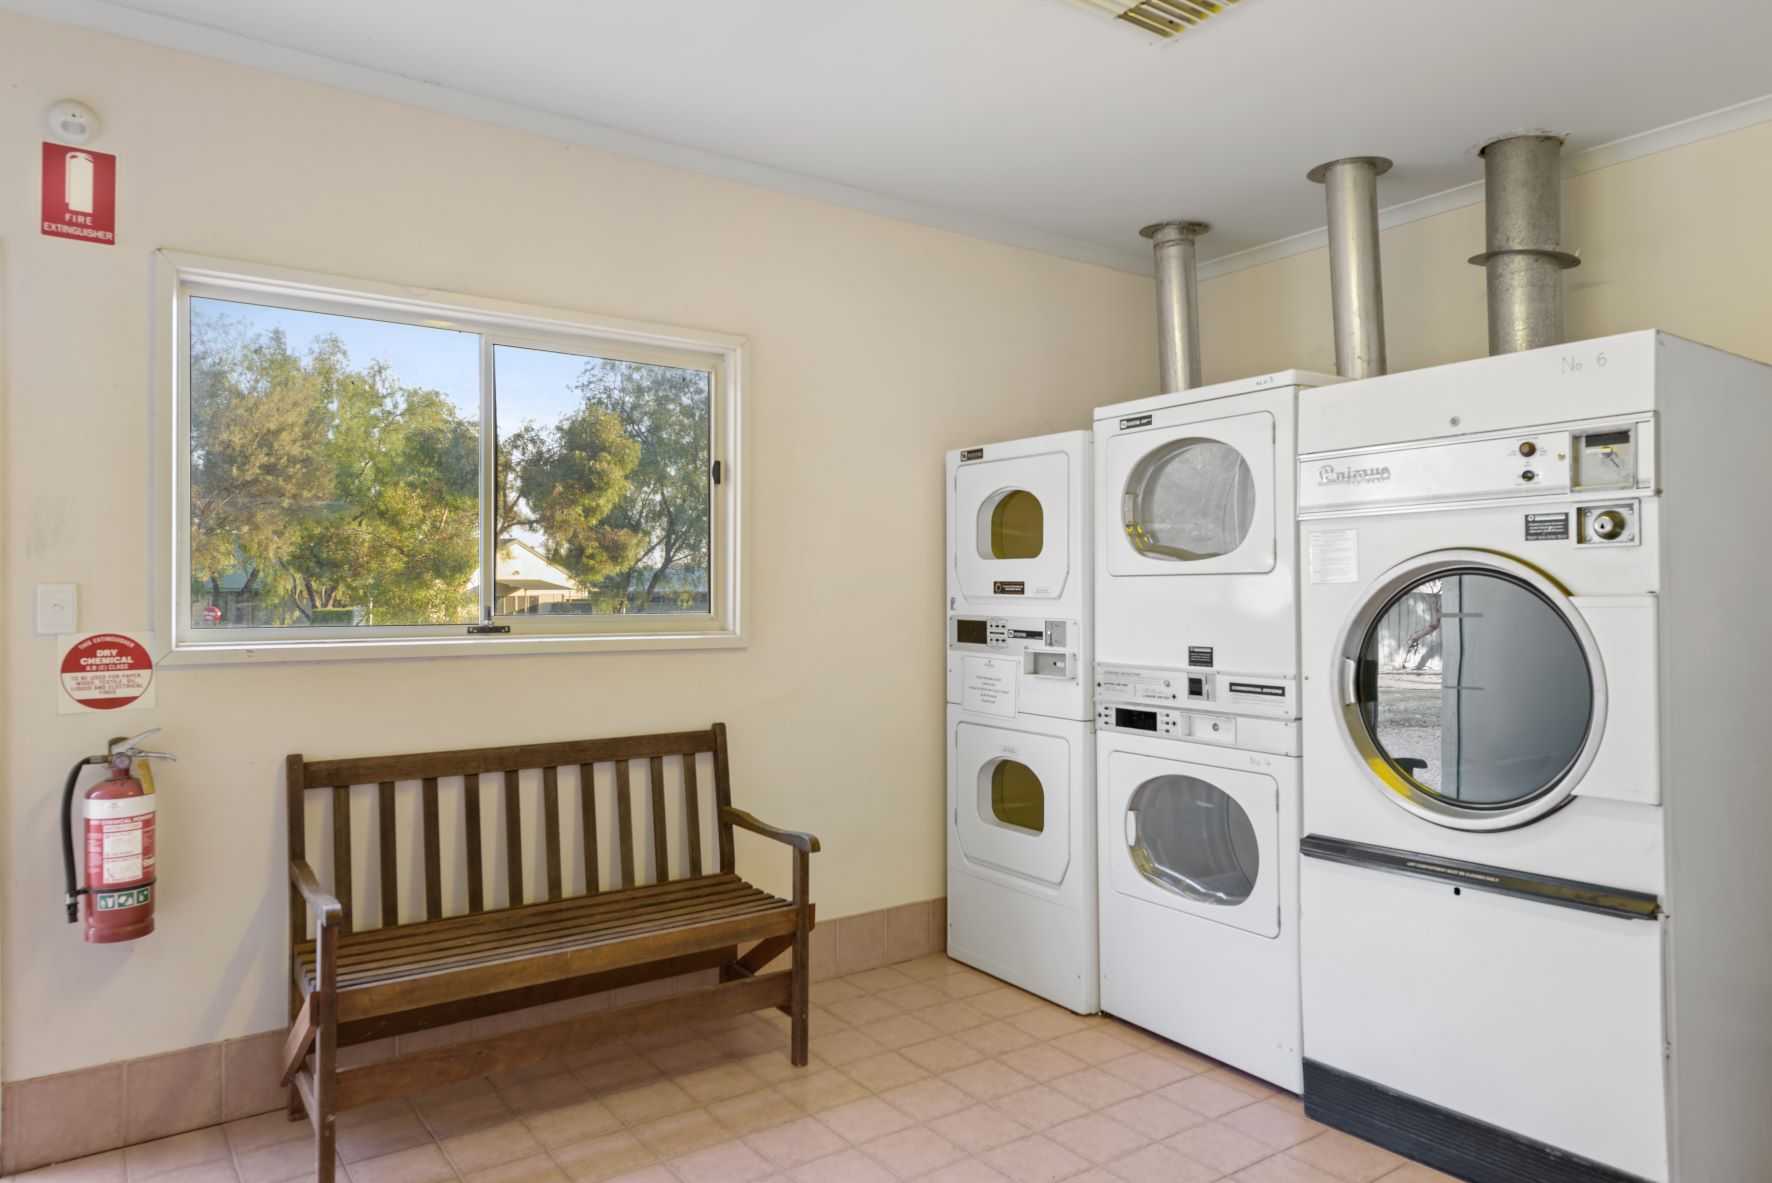 The best holiday parks in australia facilities laundry